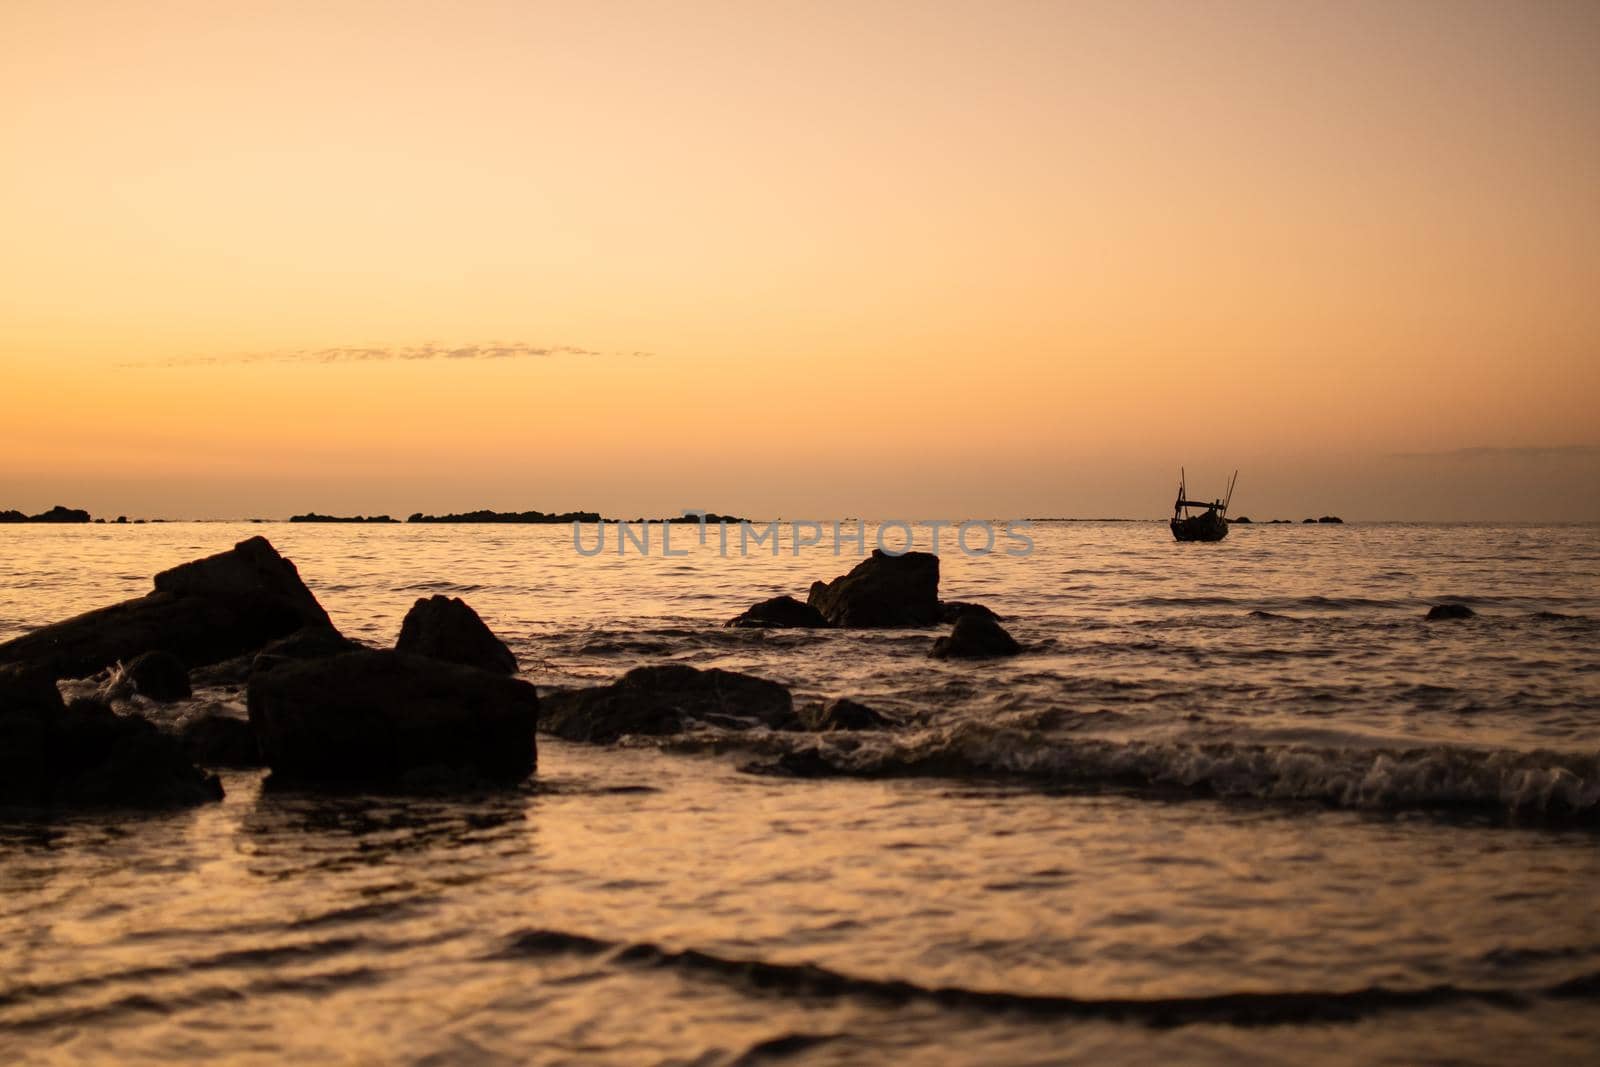 Golden sunset over a beach with rocks and a boat in the waves near Ngwesaung, Myanmar by arvidnorberg